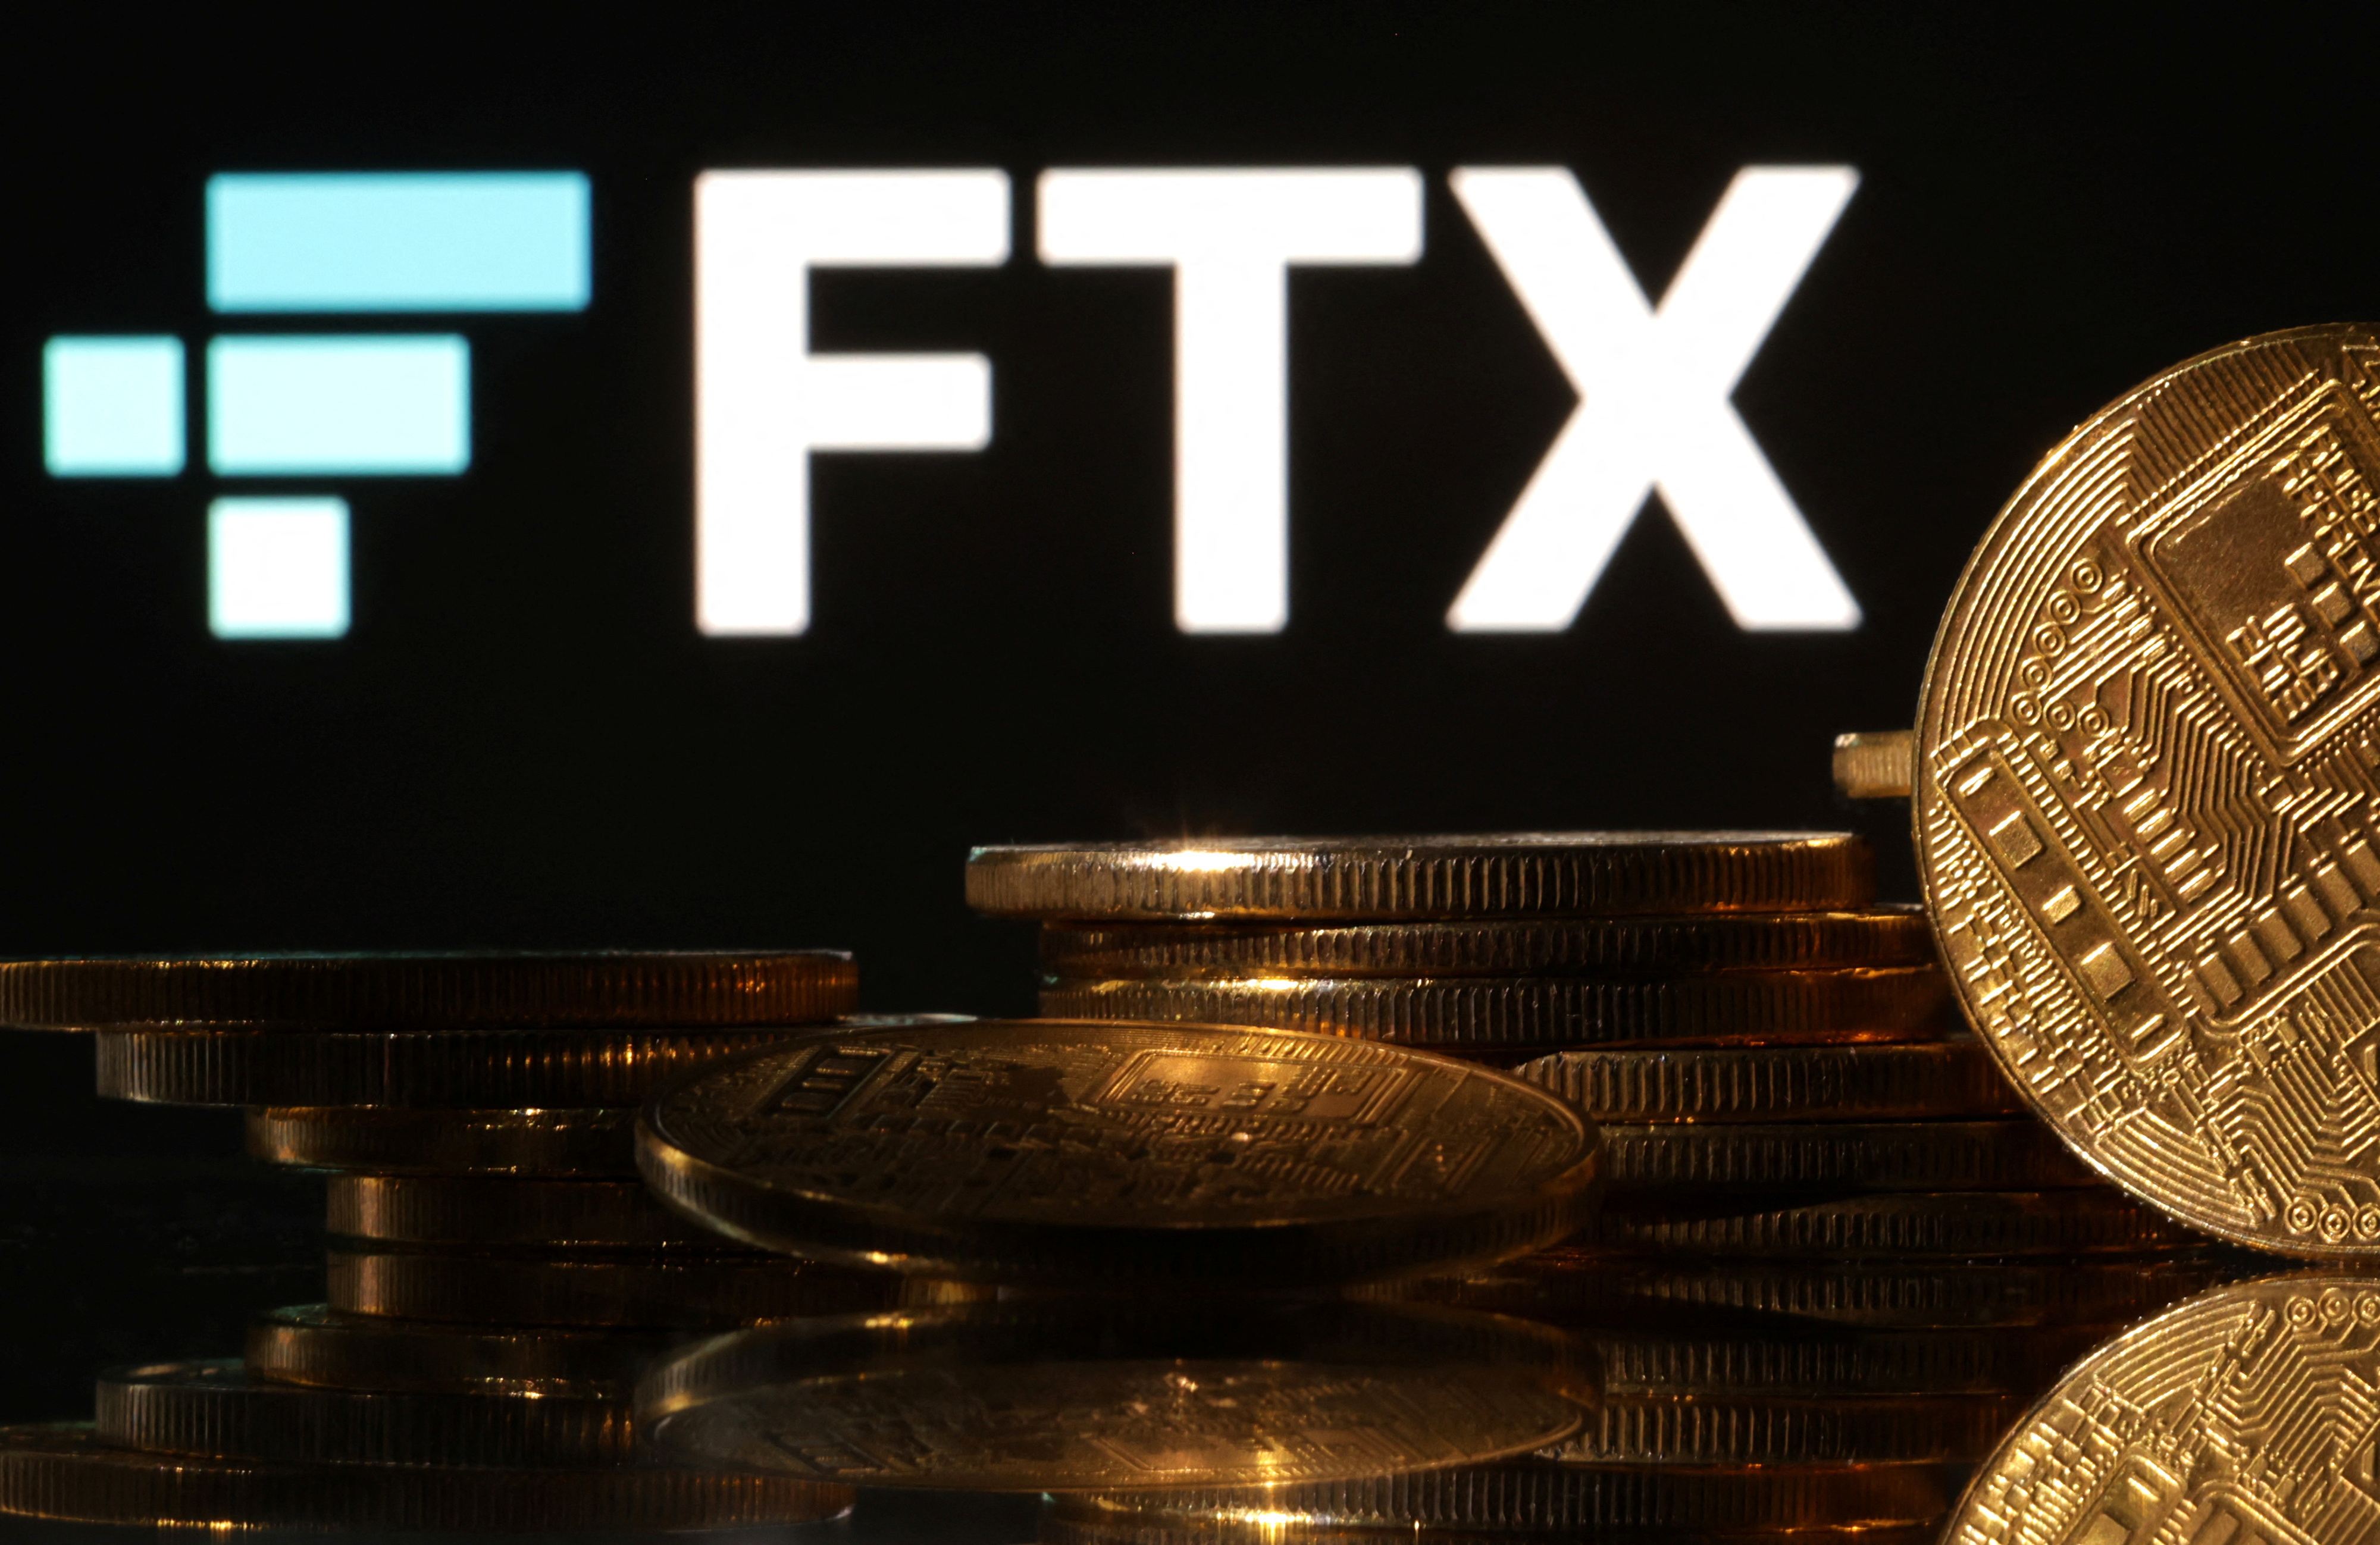 Image shows FTX logo and display of cryptocurrencies